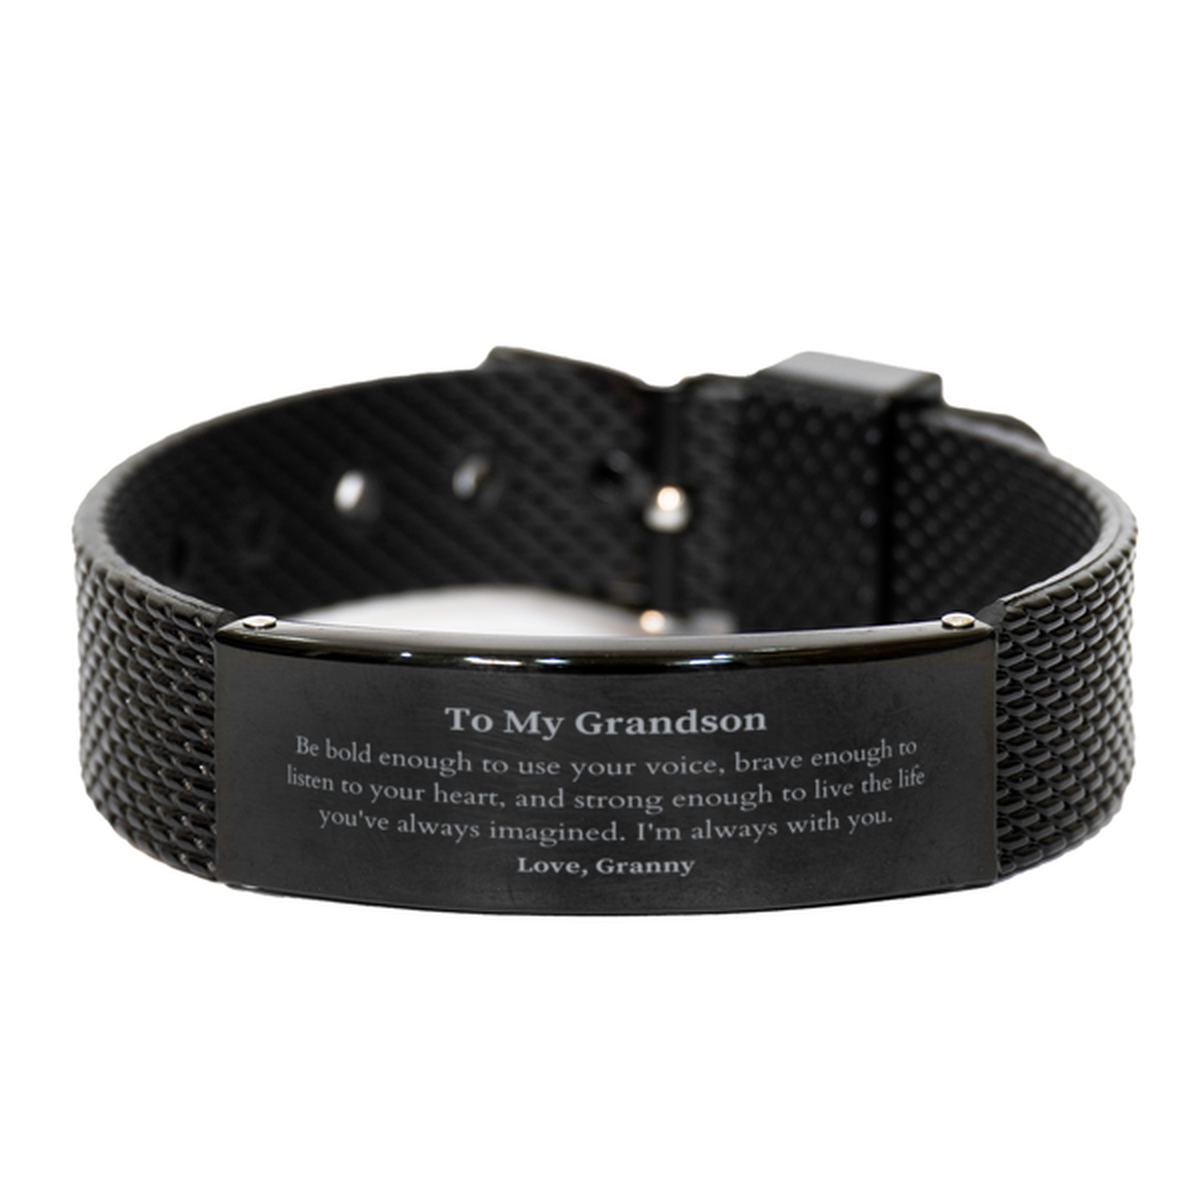 Keepsake Grandson Black Shark Mesh Bracelet Gift Idea Graduation Christmas Birthday Grandson from Granny, Grandson Be bold enough to use your voice, brave enough to listen to your heart. Love, Granny